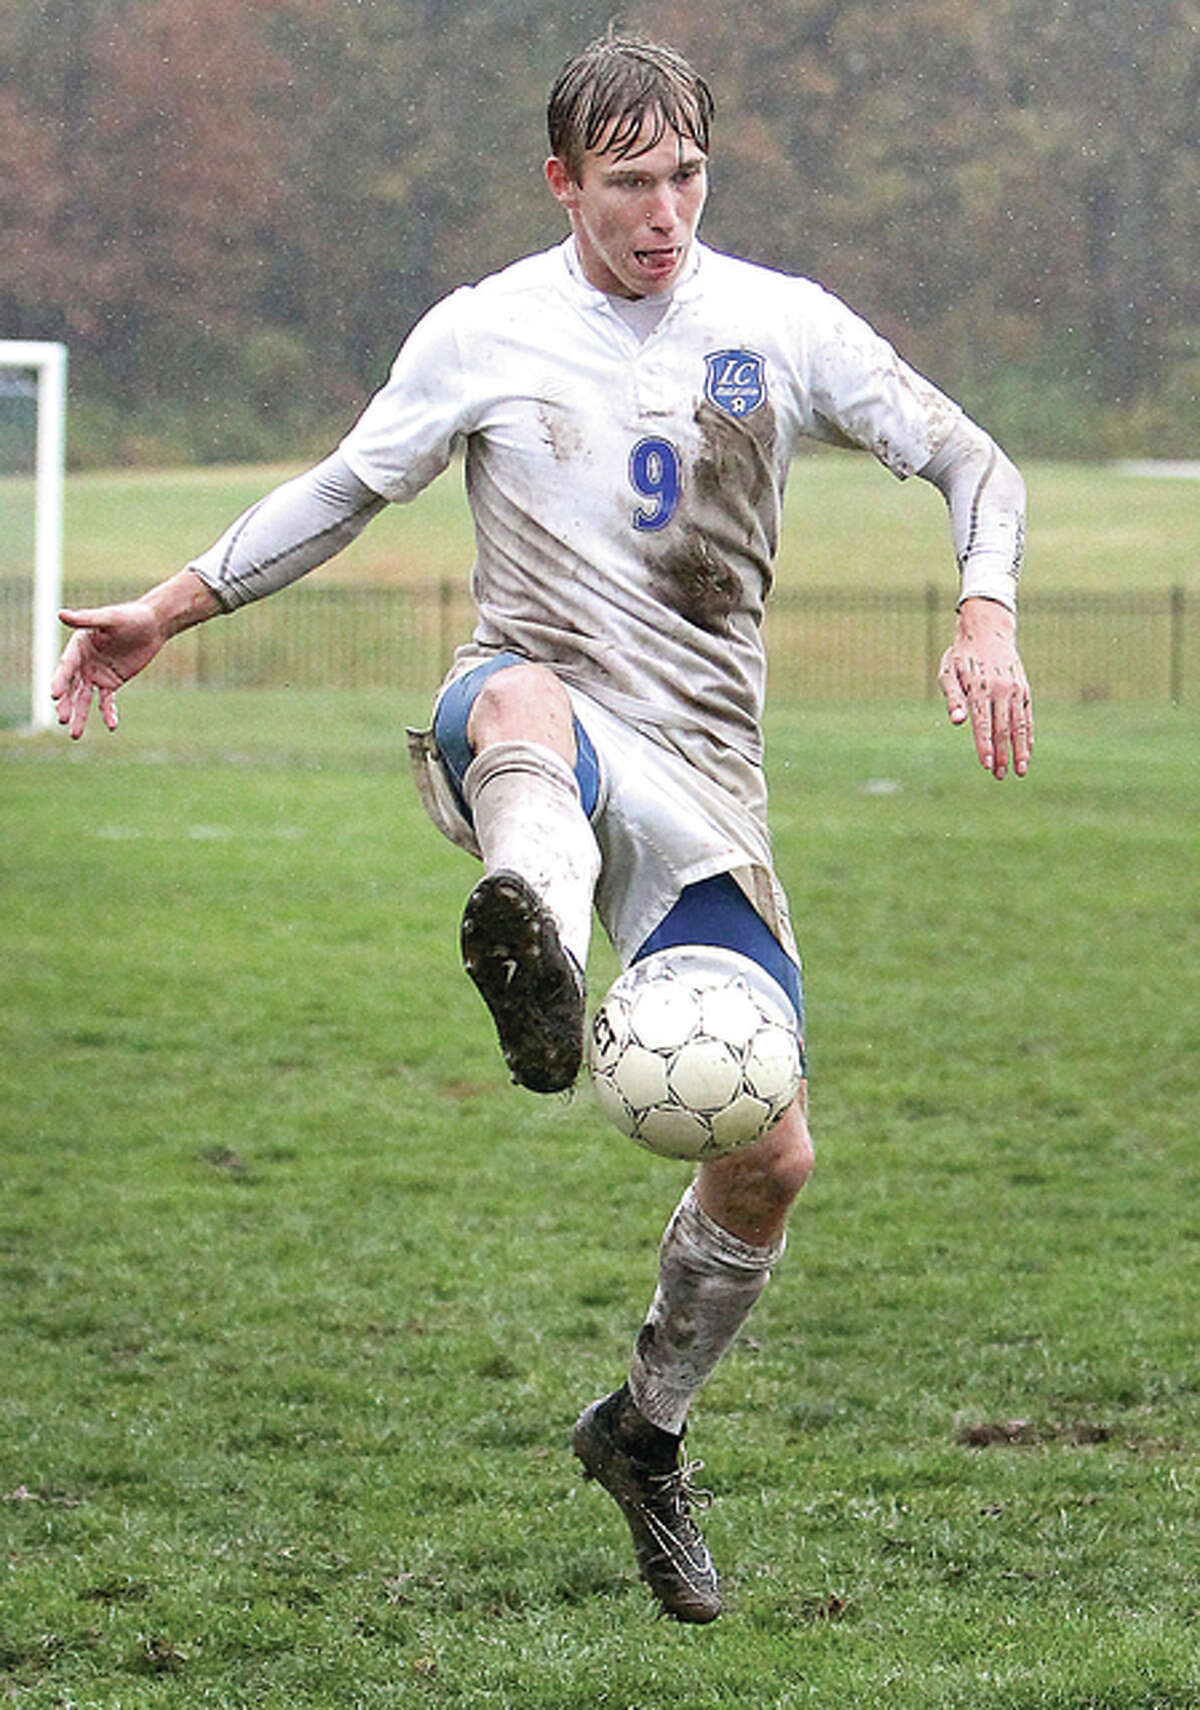 Blake Cearns settles the ball on a muddy field in postseason action against rival Southwestern Illinois College.